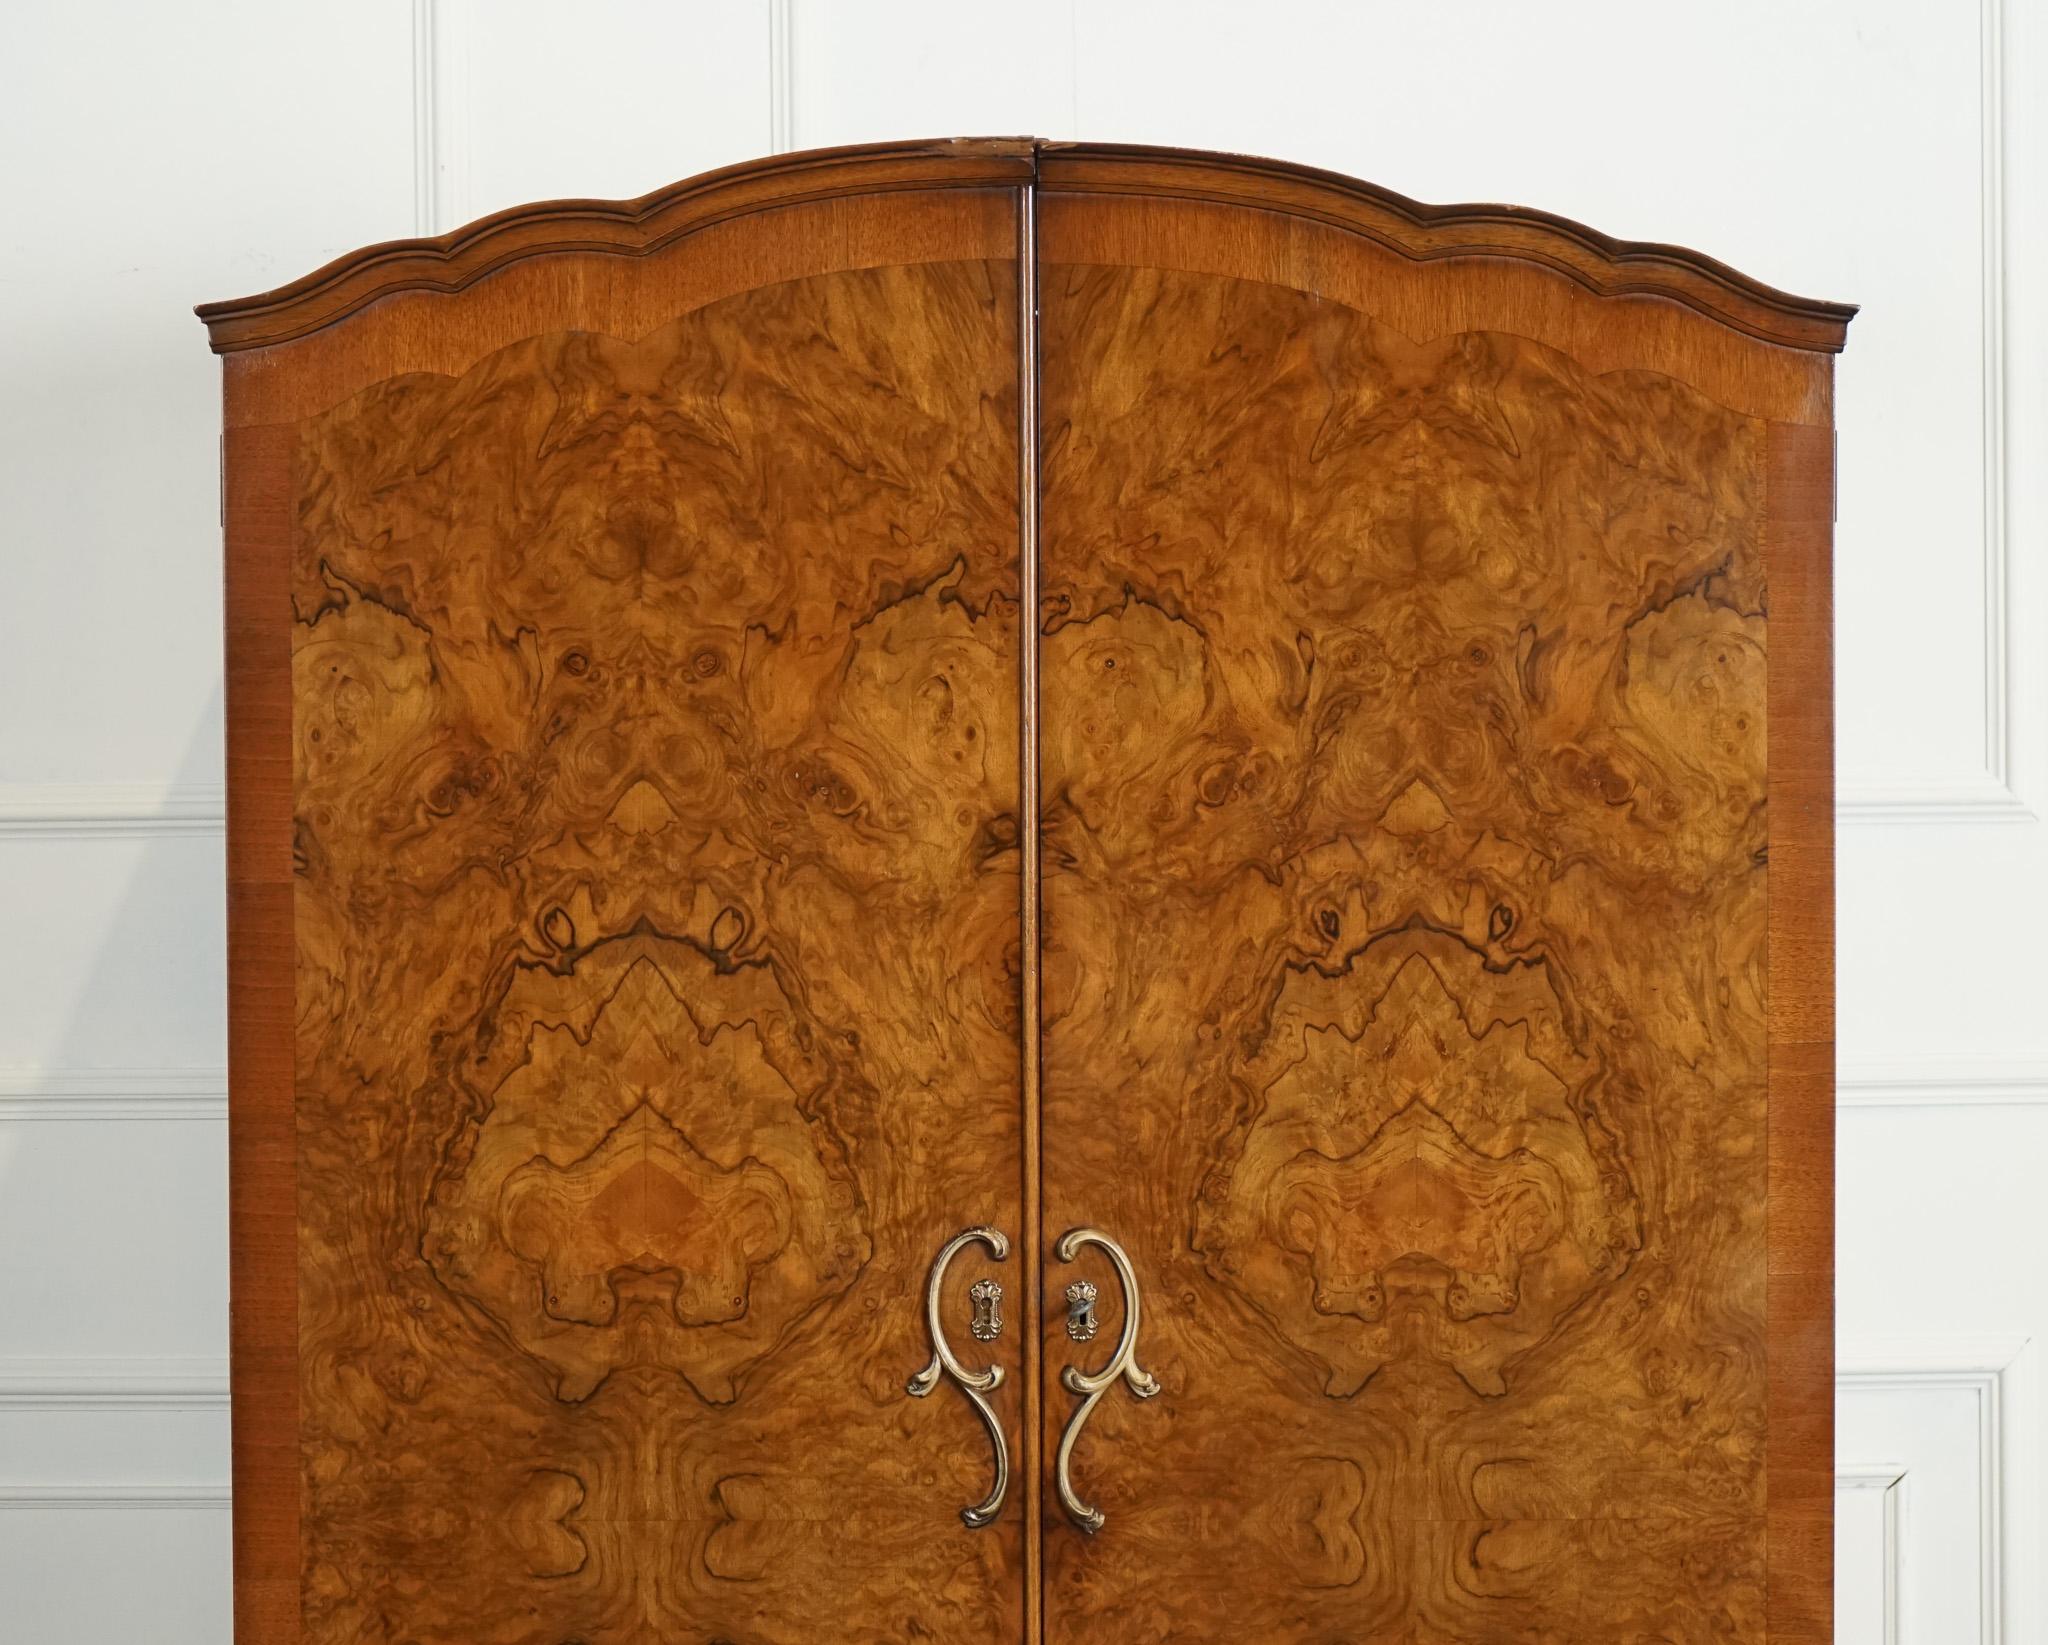 Hand-Crafted VINTAGE PETITE ART DECO 1940s BURR WALNUT WARDROBE MADE BY HEIRLOOM For Sale